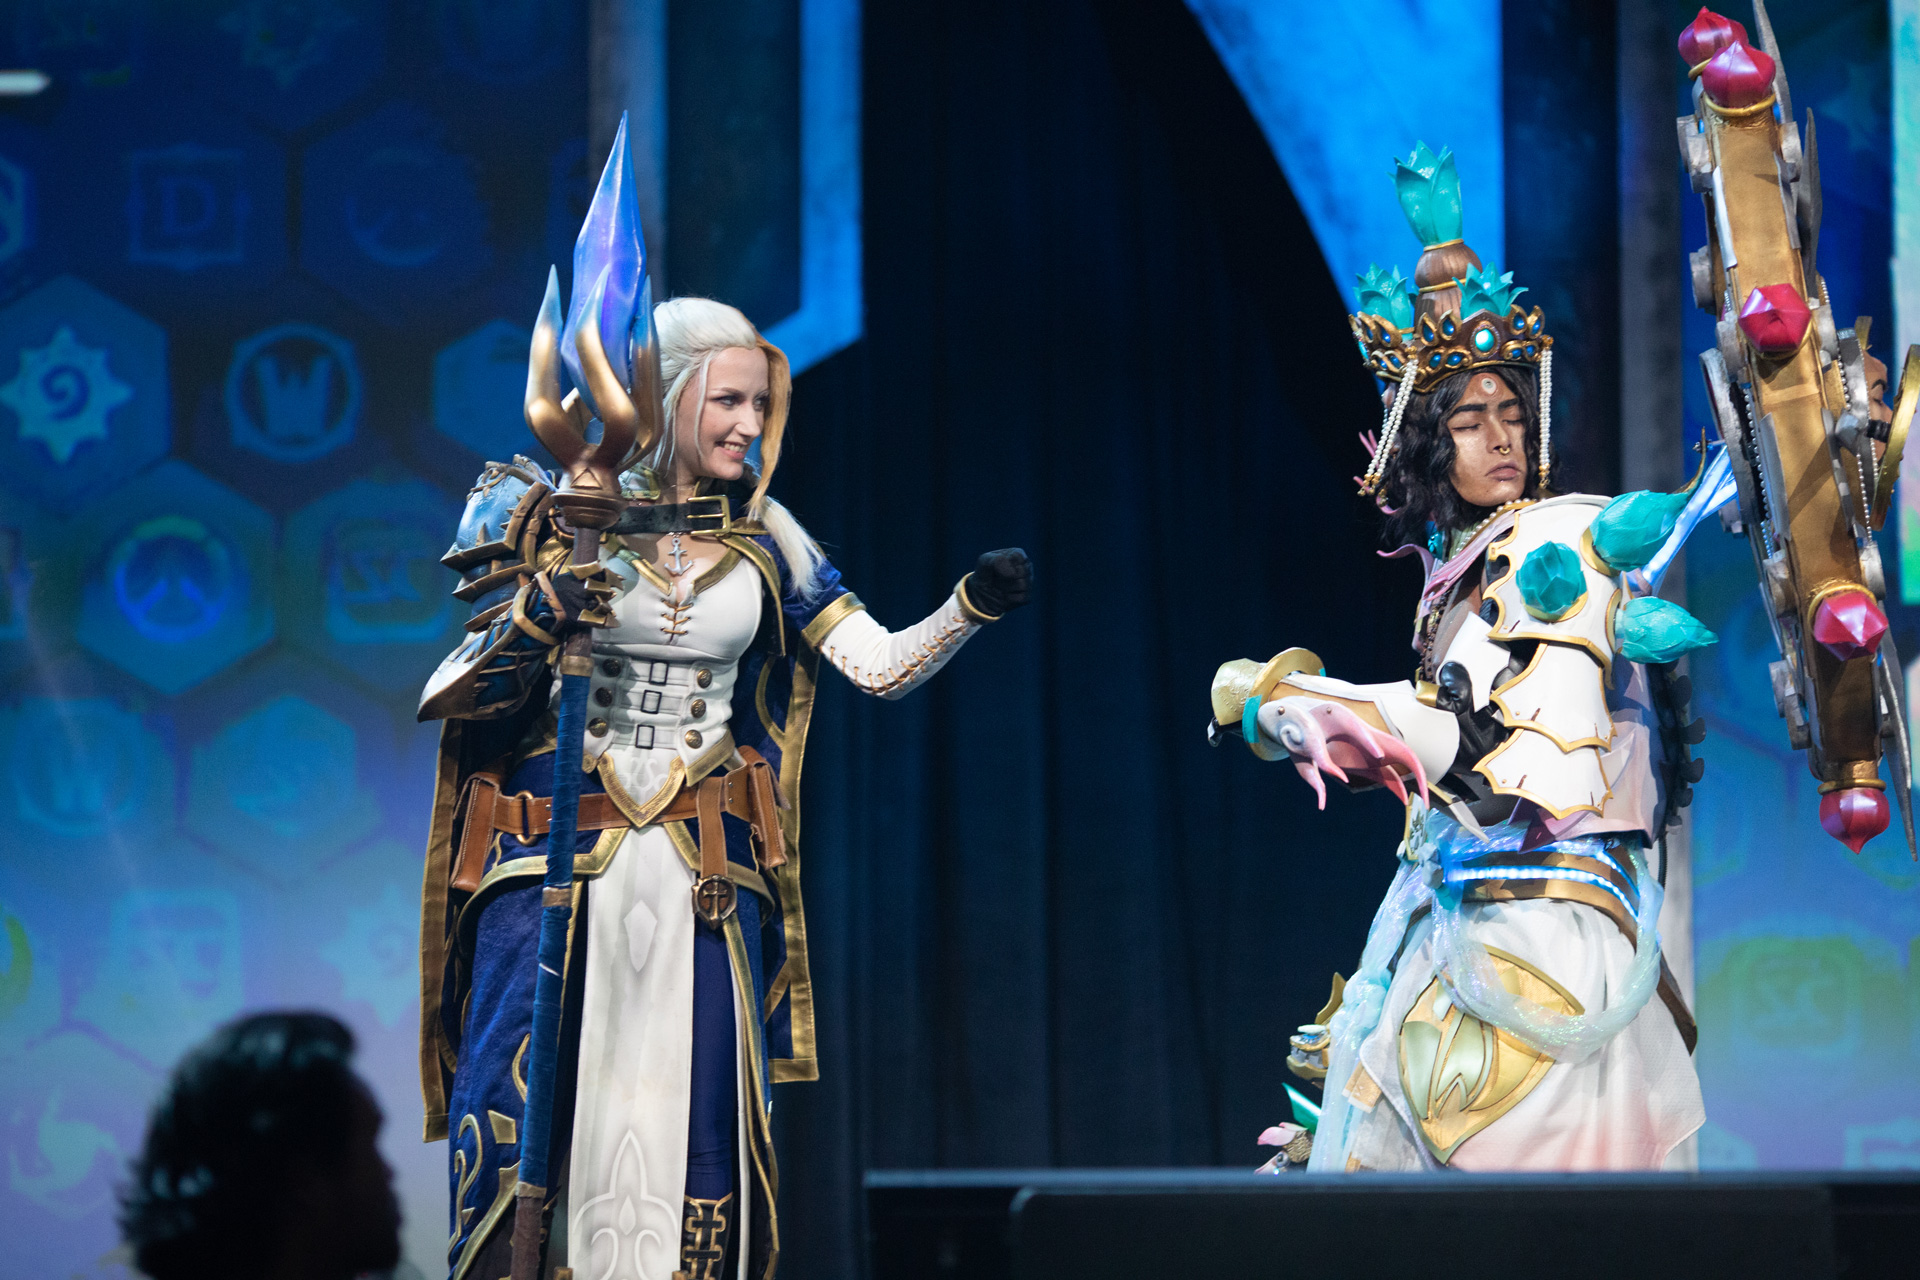 BlizzCon 2019 schedule includes 6 ‘coming soon’ slots | VGC